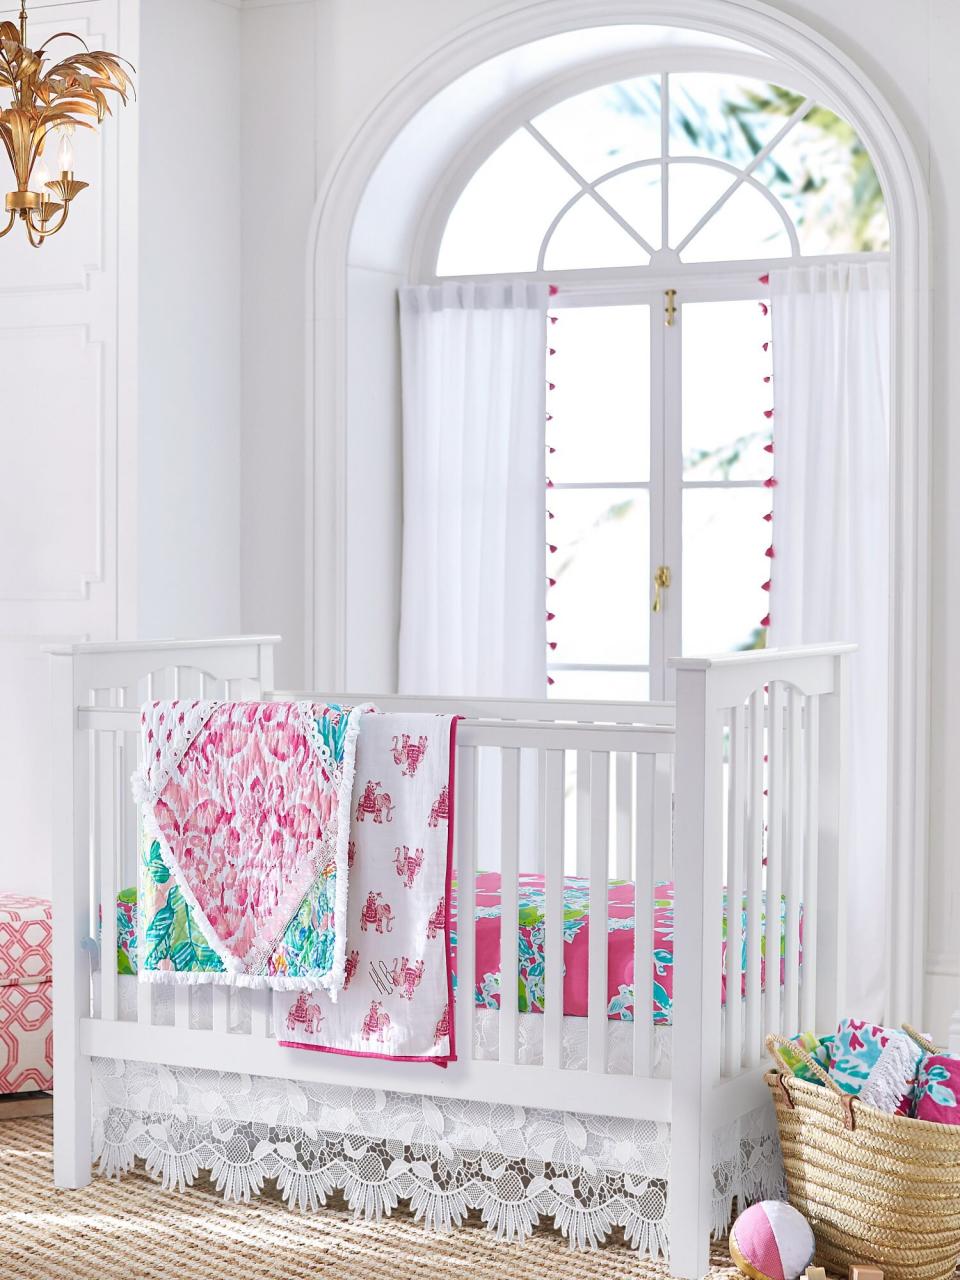 Pottery Barn Kids new Lilly Pulitzer collaboration